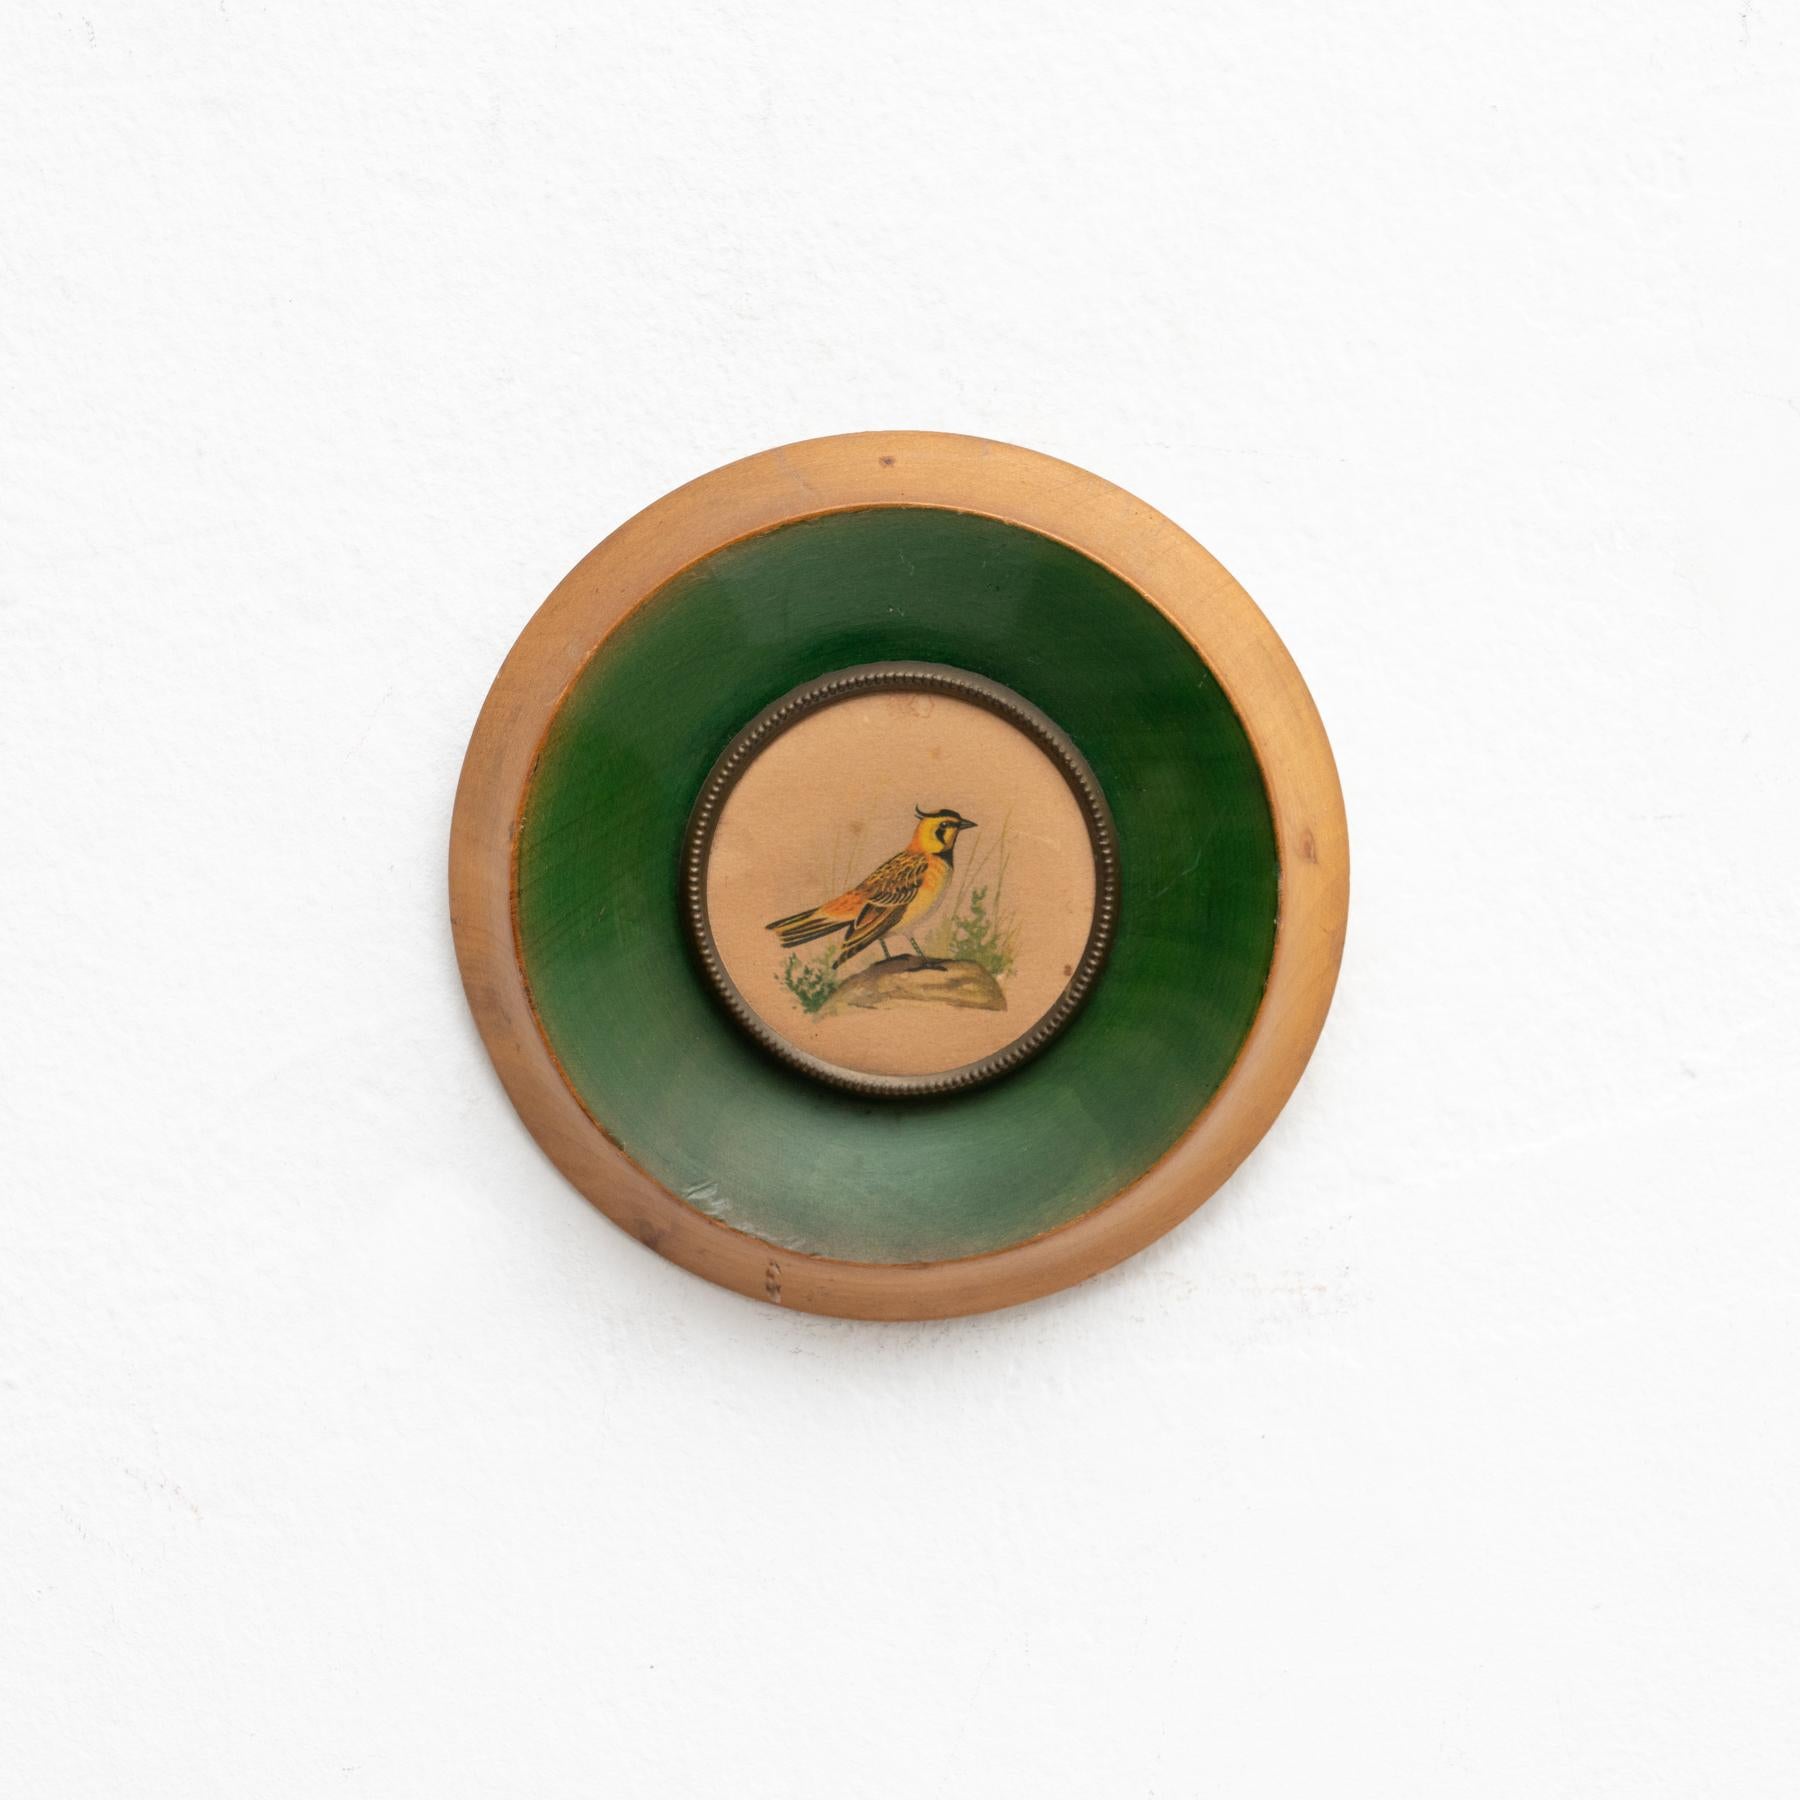 Round framed hand painted artwork of a bird design by unknown artist, circa 1960.

In original condition, with minor wear consistent of age and use, preserving a beautiul patina.

Material:
Wood.